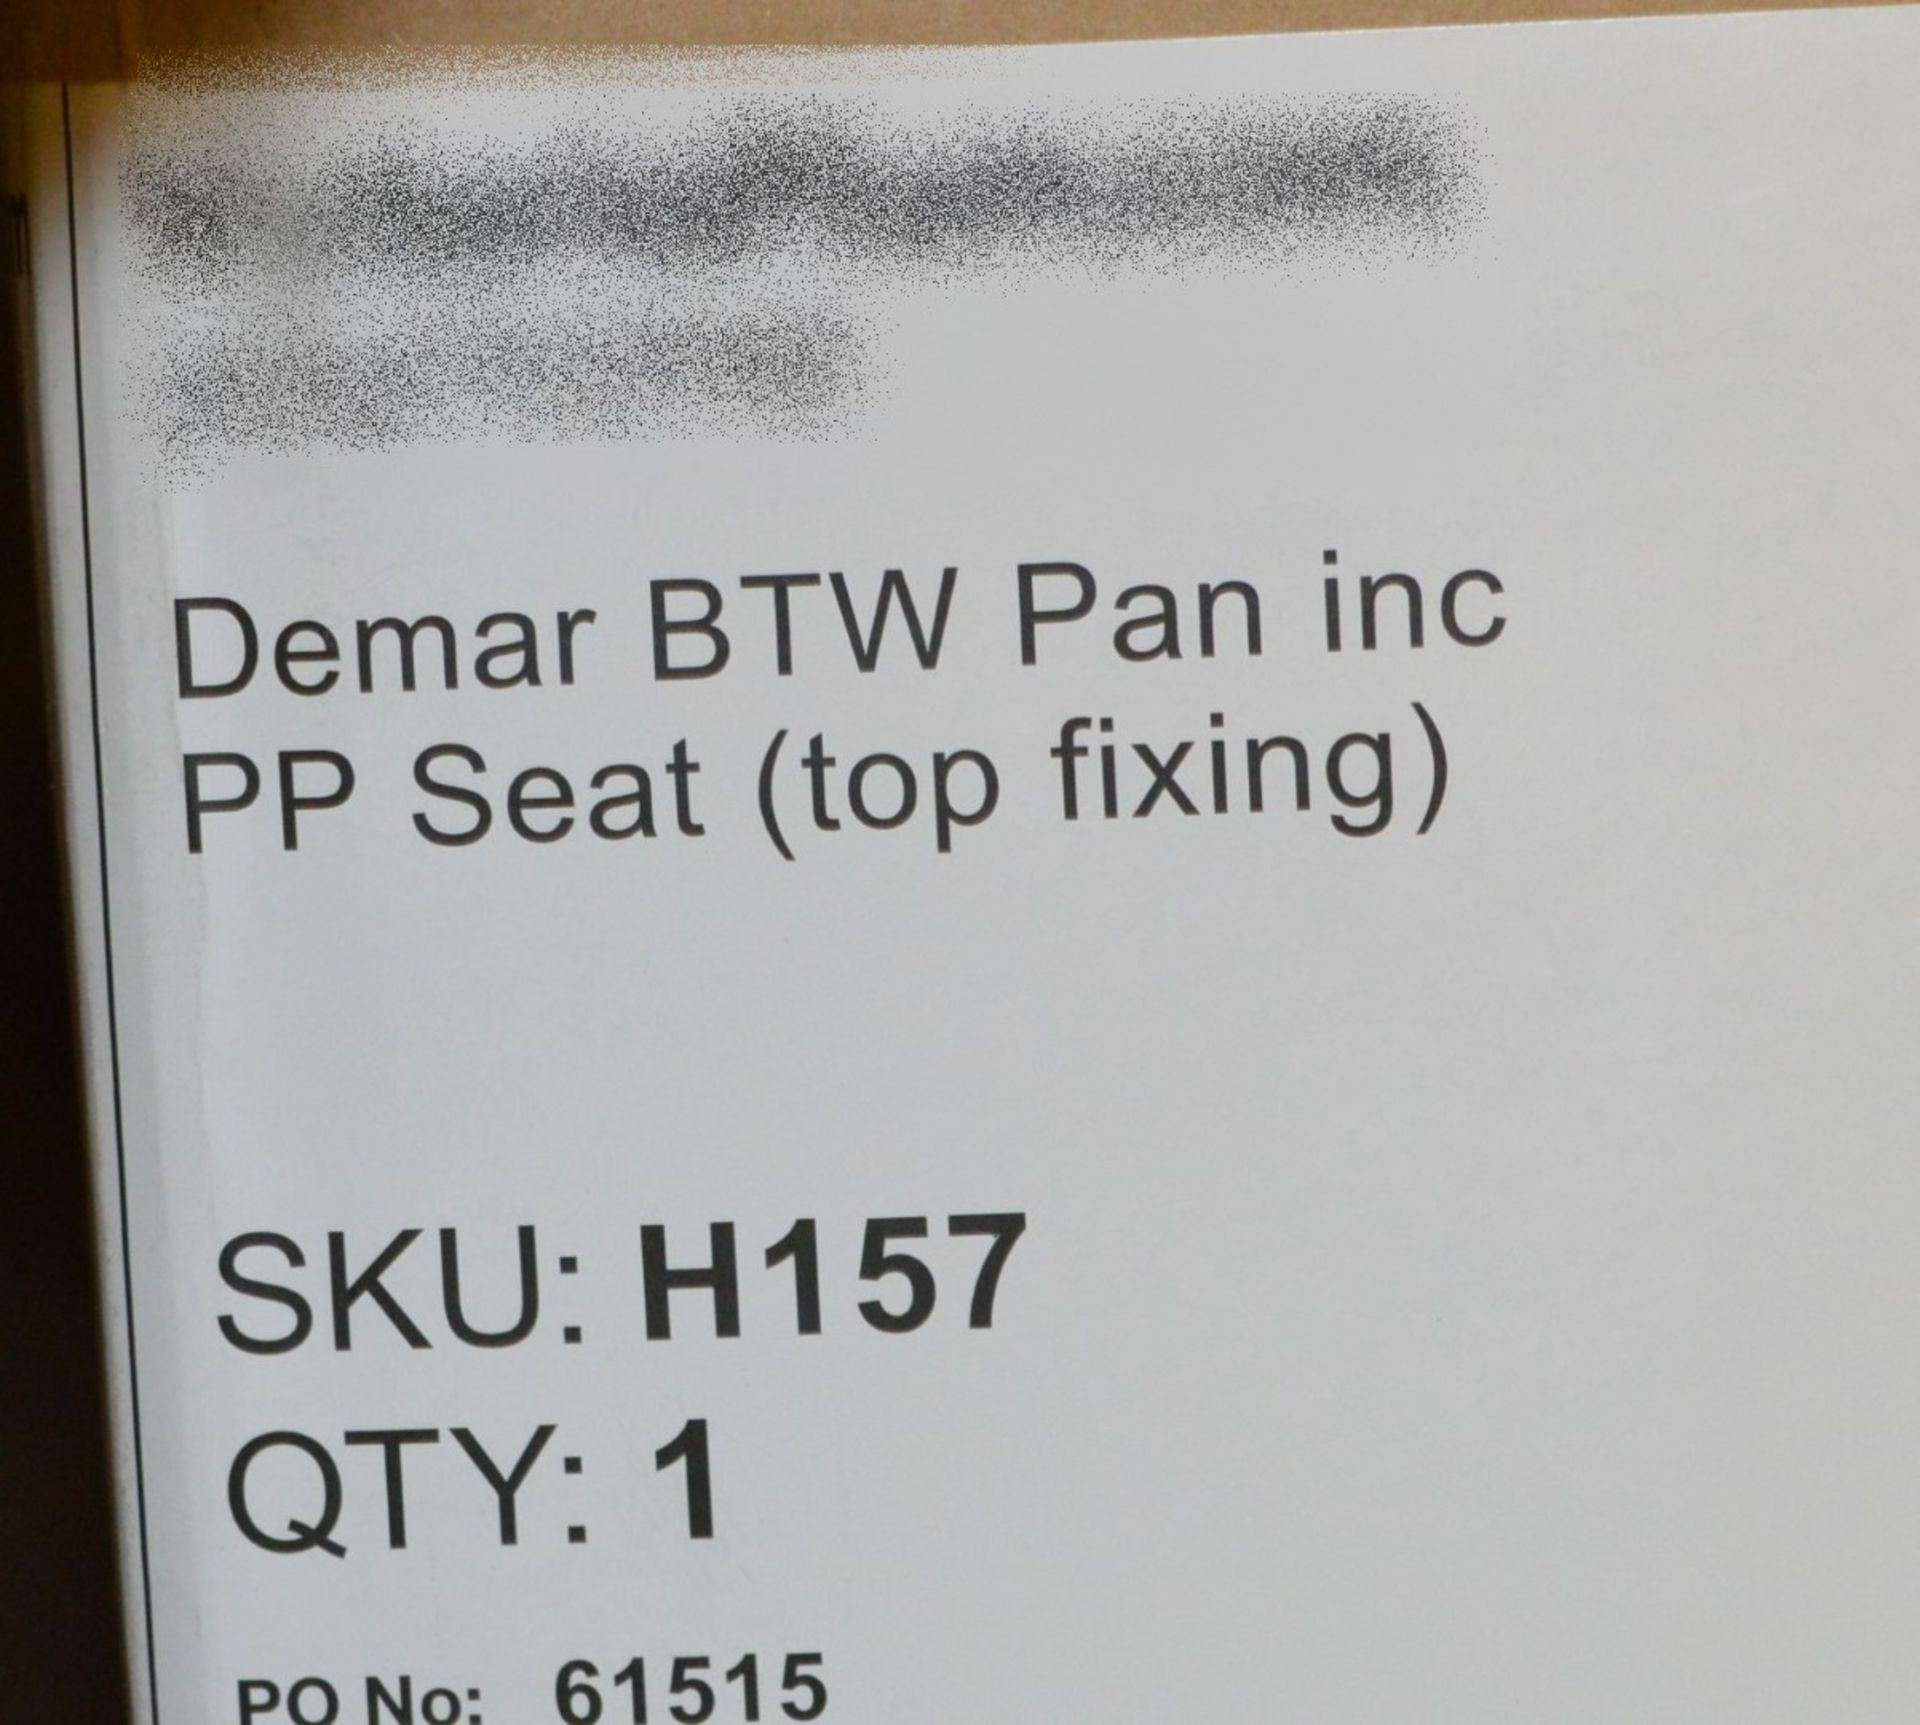 1 x Demar BTW Toilet Pan Including Toilet Seat - Unused Stock - CL190 - Ref BR089 - Location: Bolton - Image 5 of 6